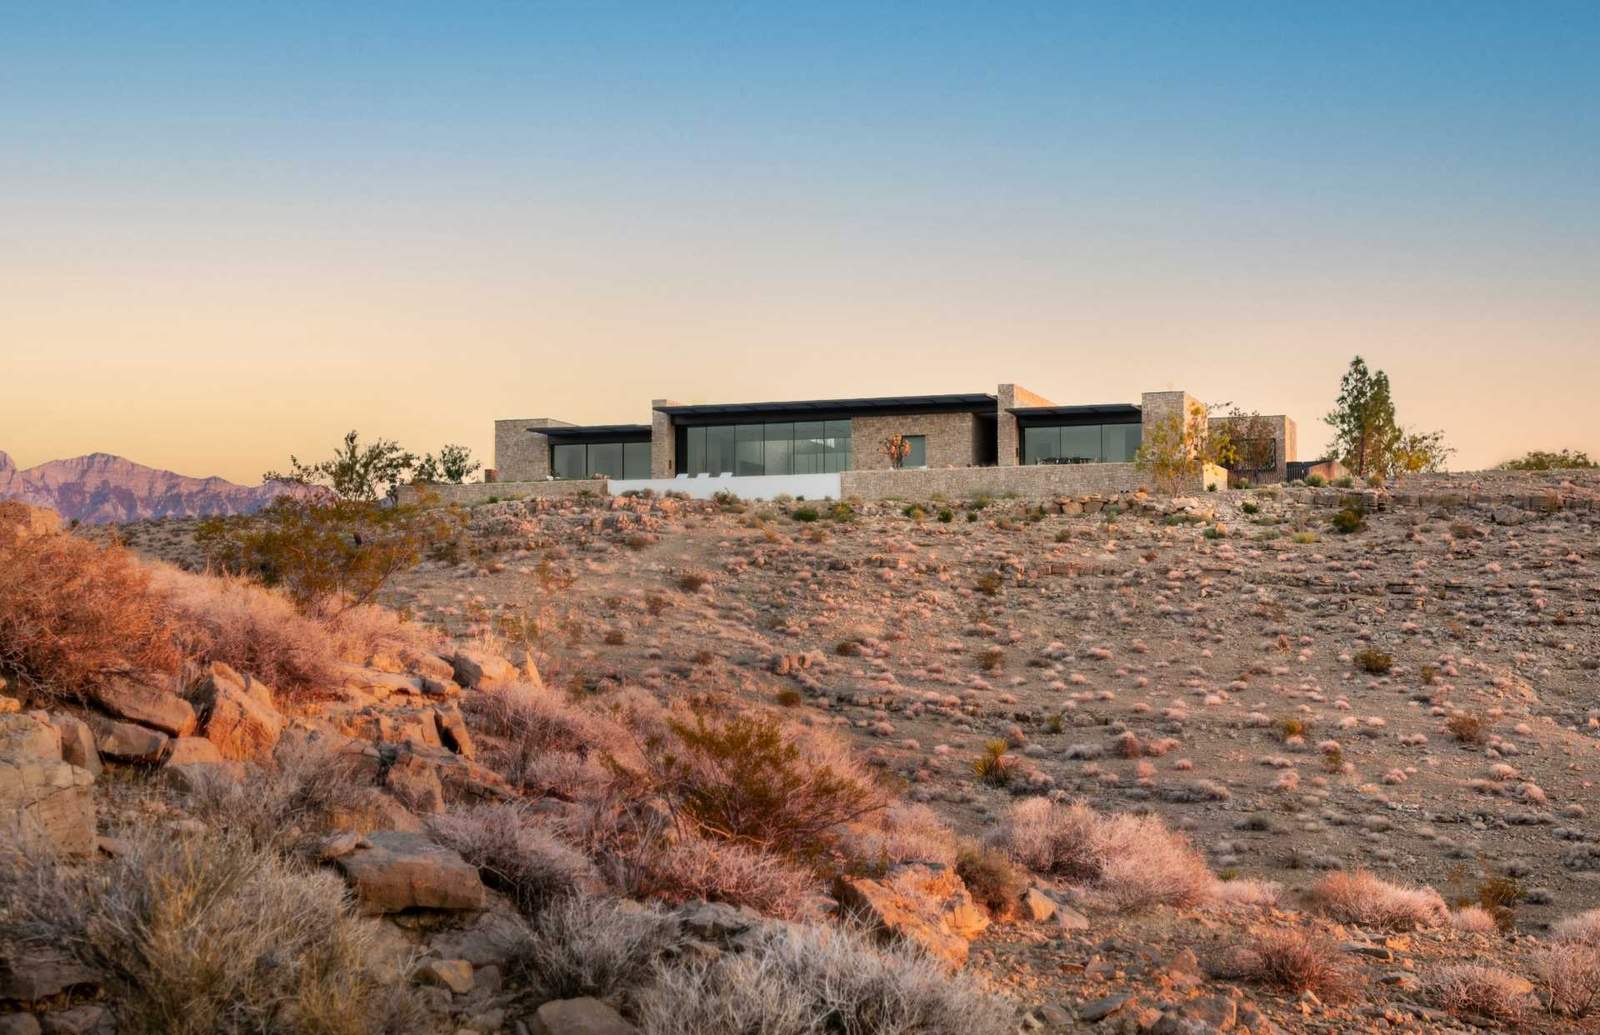 The Surrounding Desert Was Blended Into This Modern Home